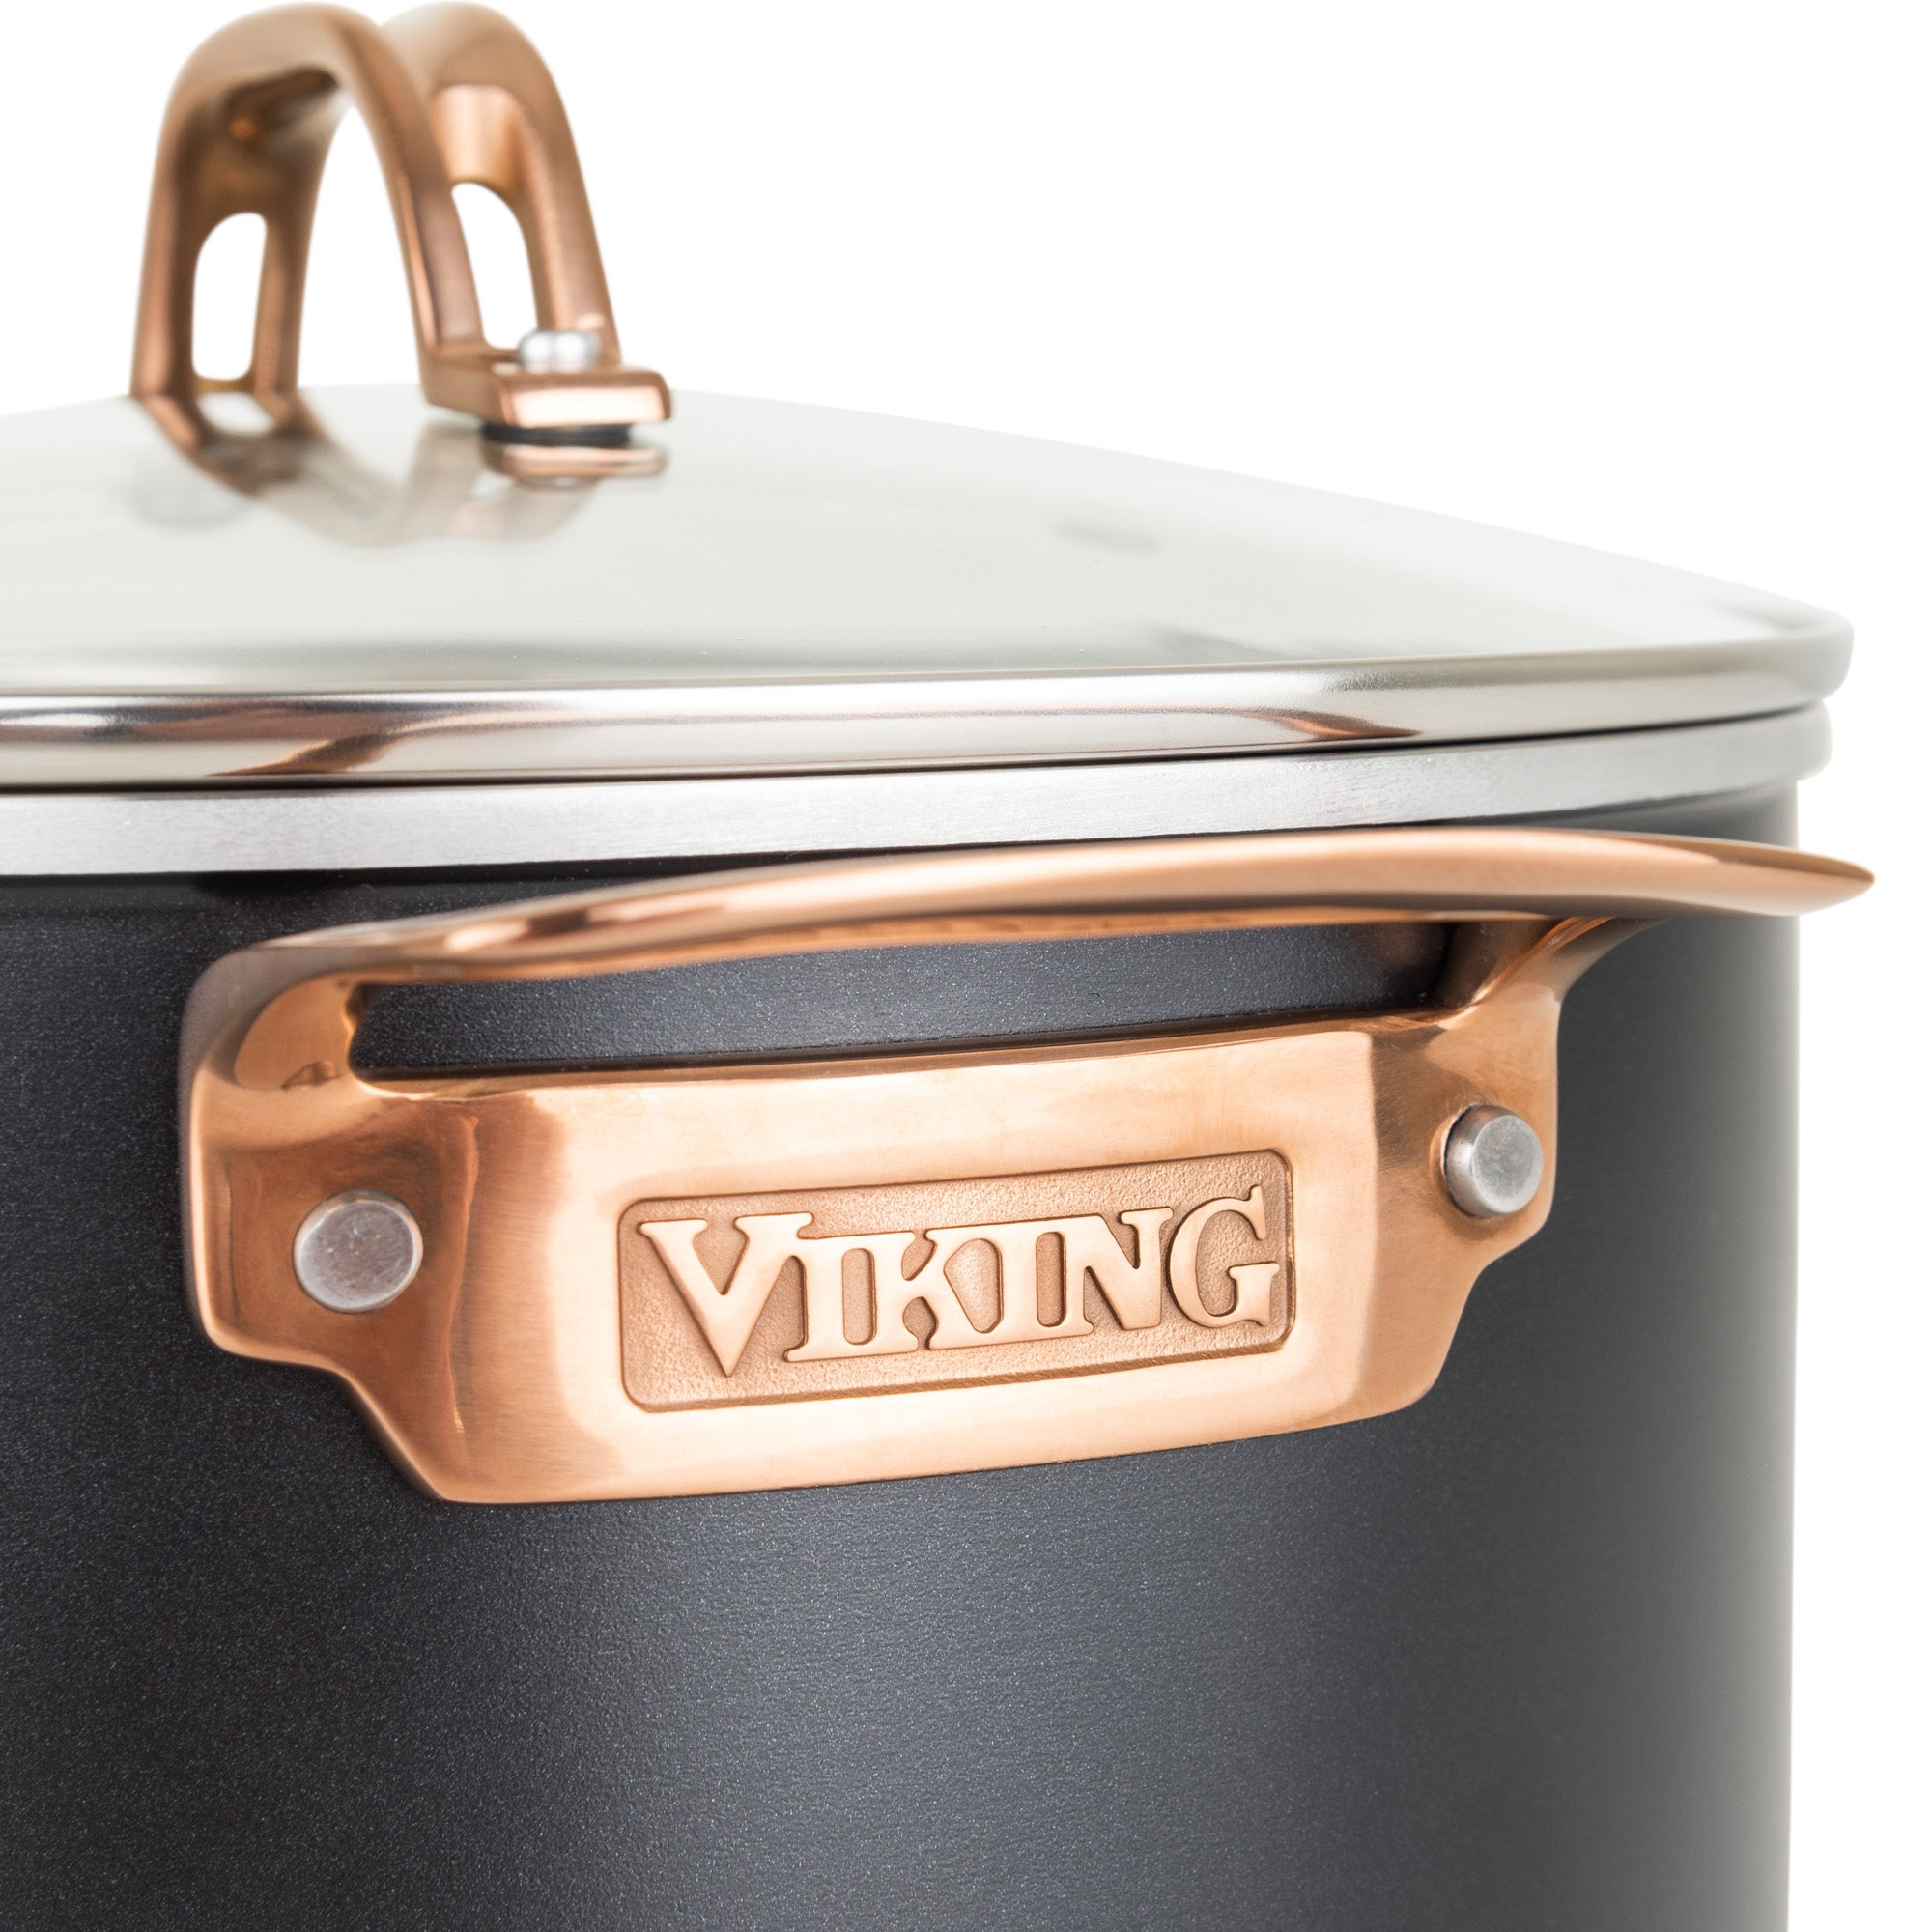 Viking 3-Ply Black and Copper Saucepan with Glass Lid - 3 qt.